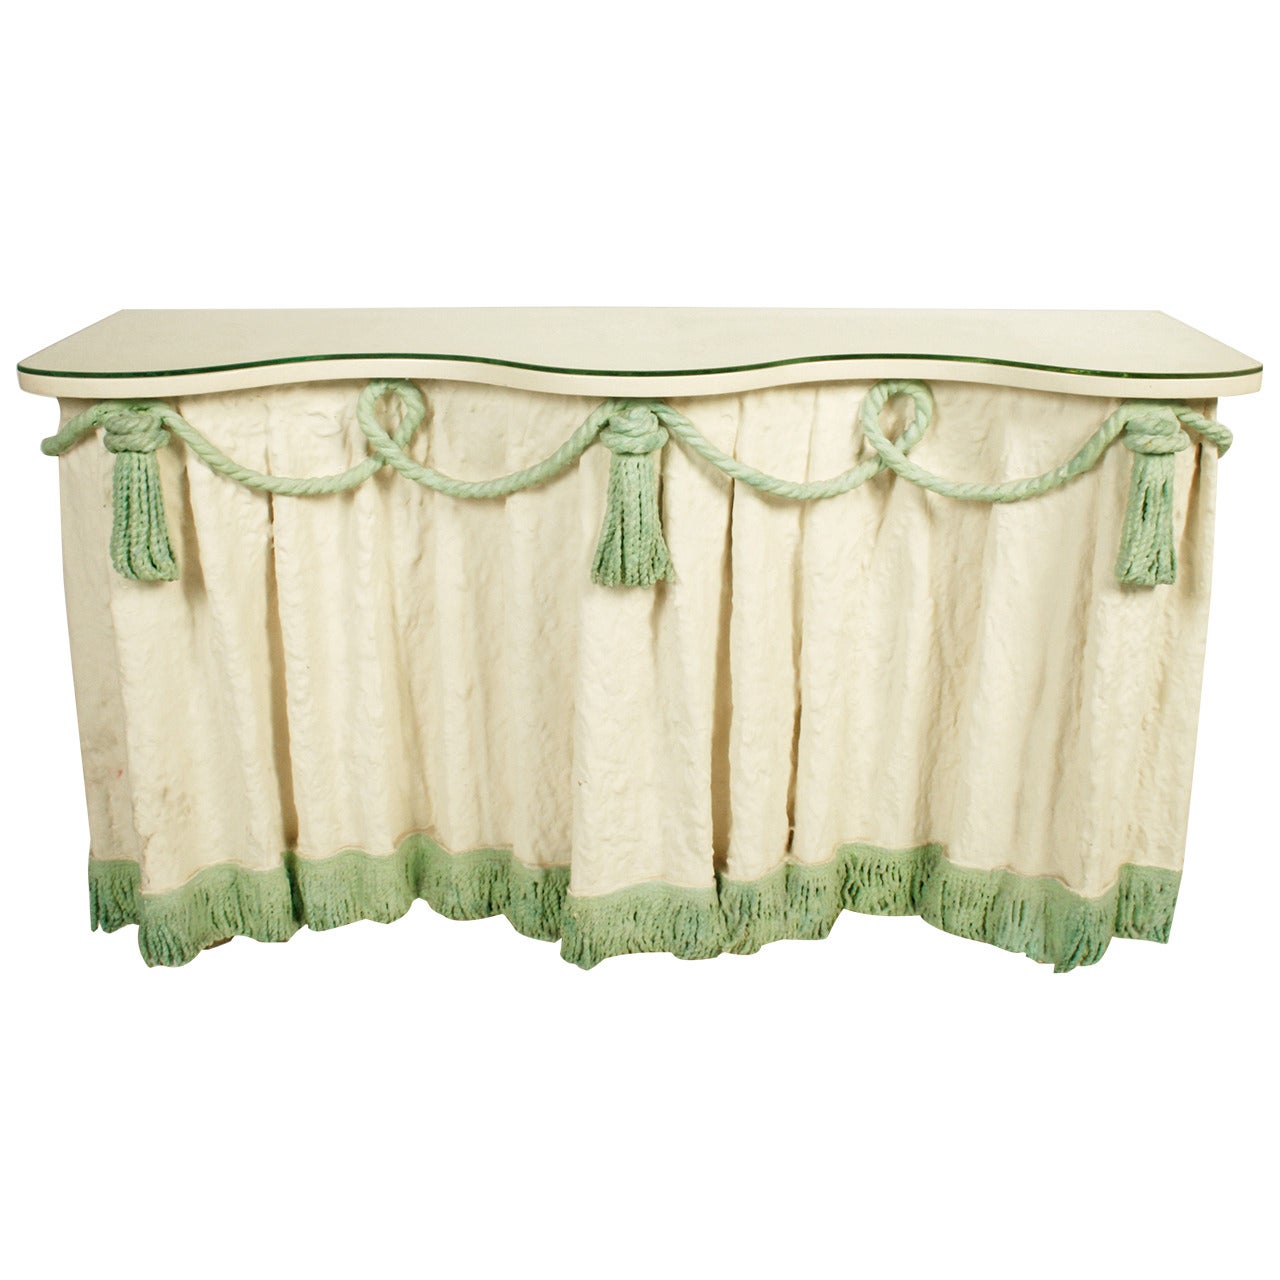 Plaster and Fabric Draped Credenza, Mid-20th Century